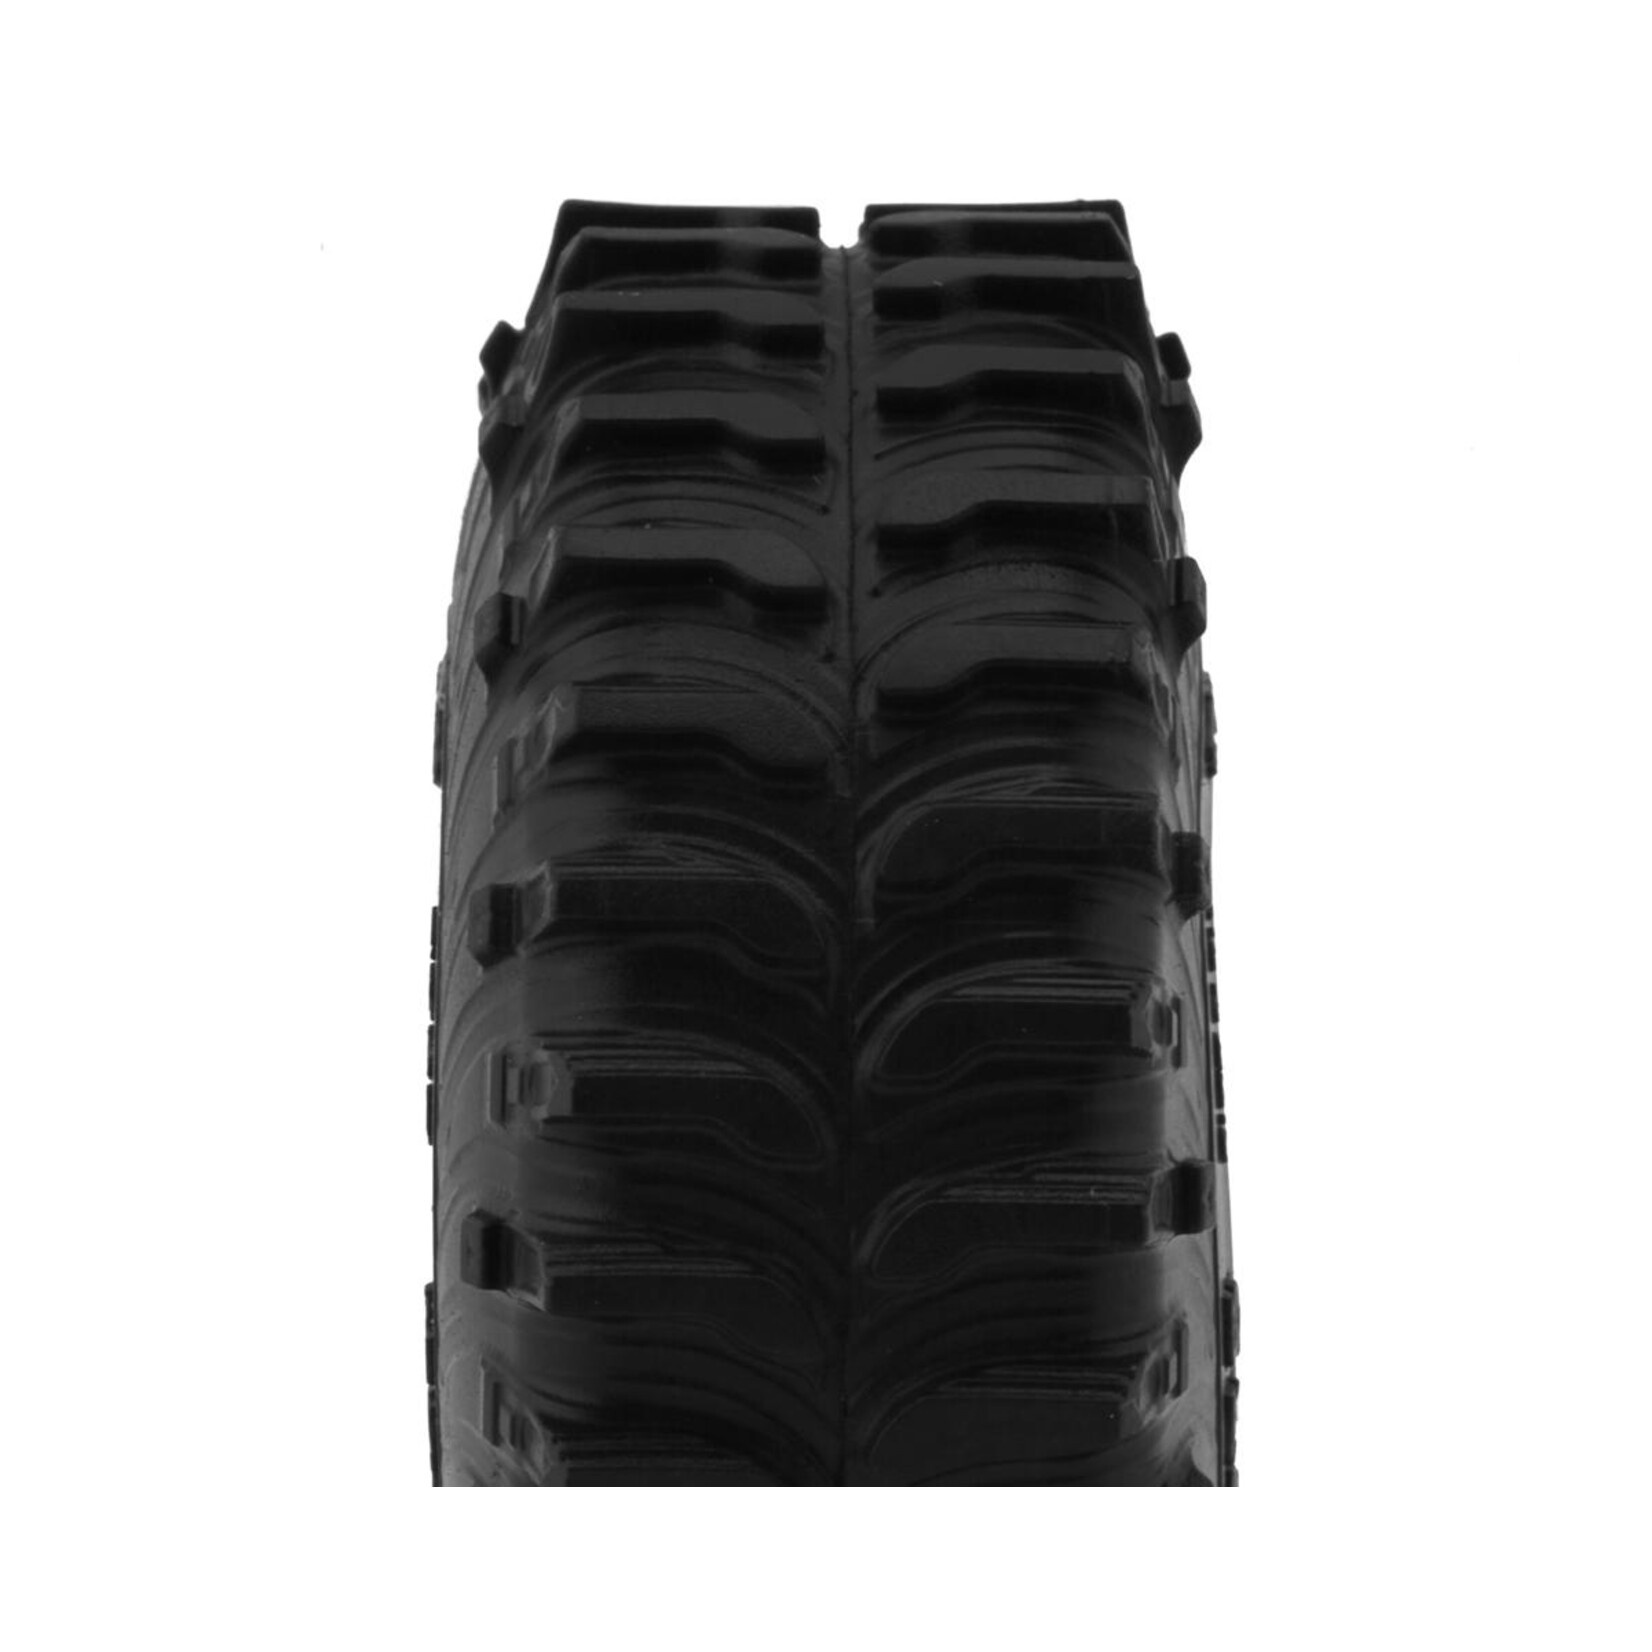 JConcepts JConcepts The Hold 1.0" Micro Crawler Tires (63mm OD) (2) (Green) #4058-02